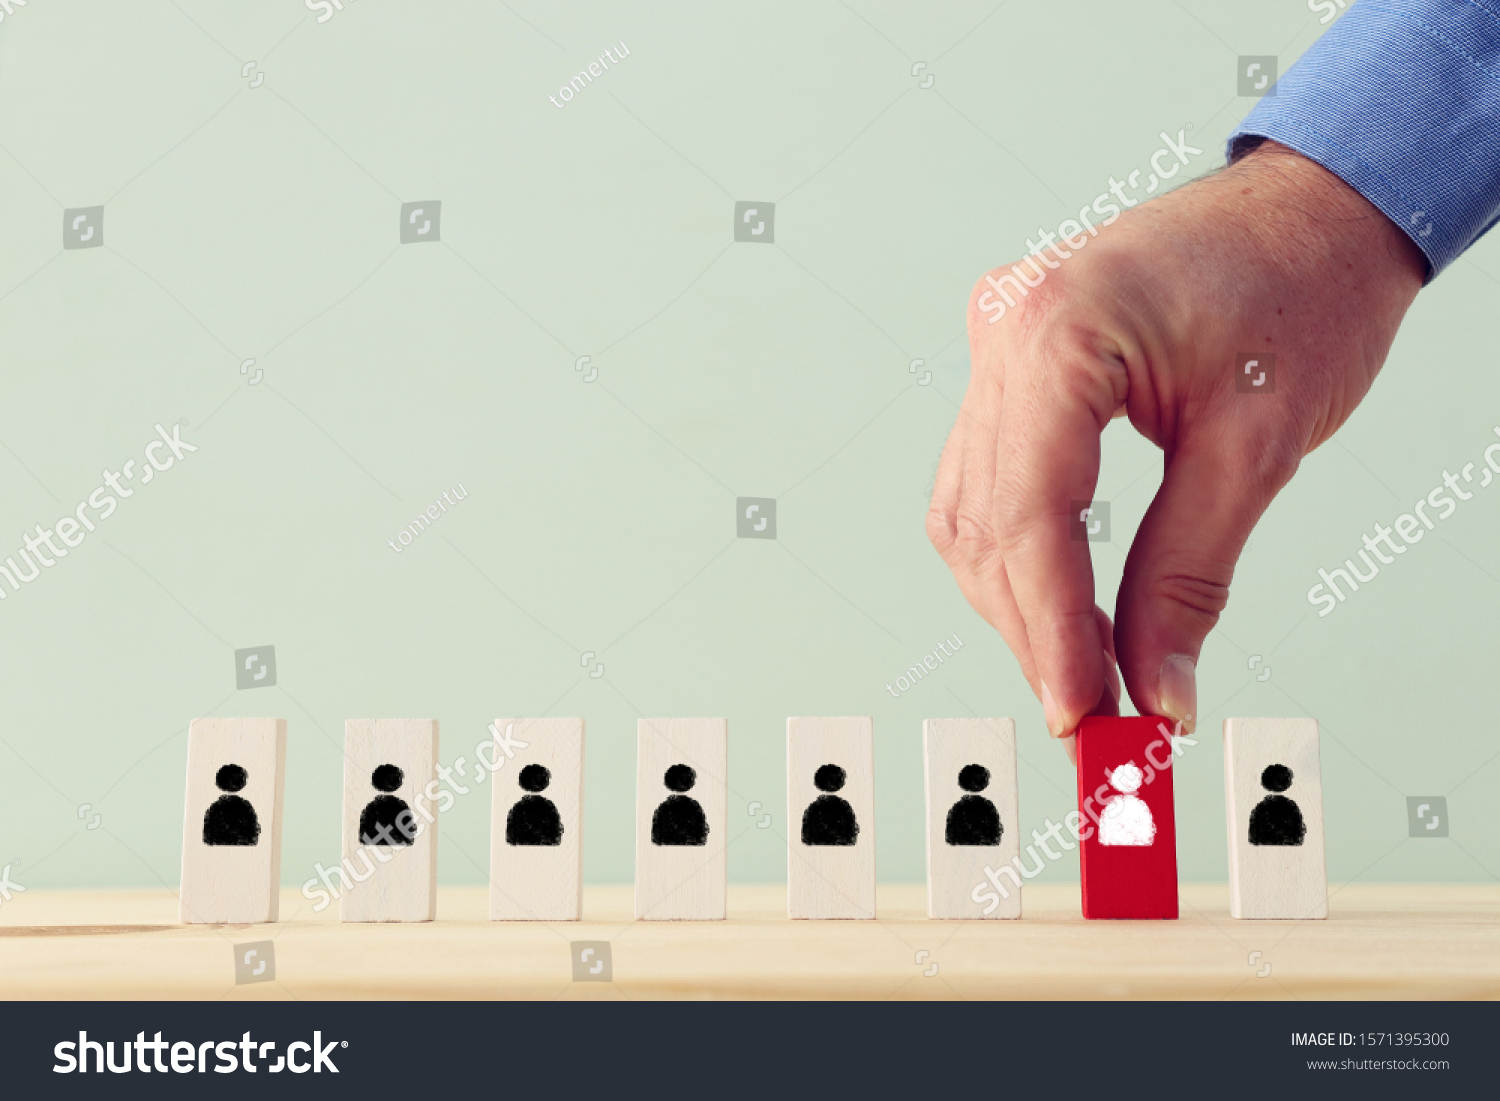 Business concept image of tangram puzzle blocks with people icons over wooden table, human resources and management concept #1571395300